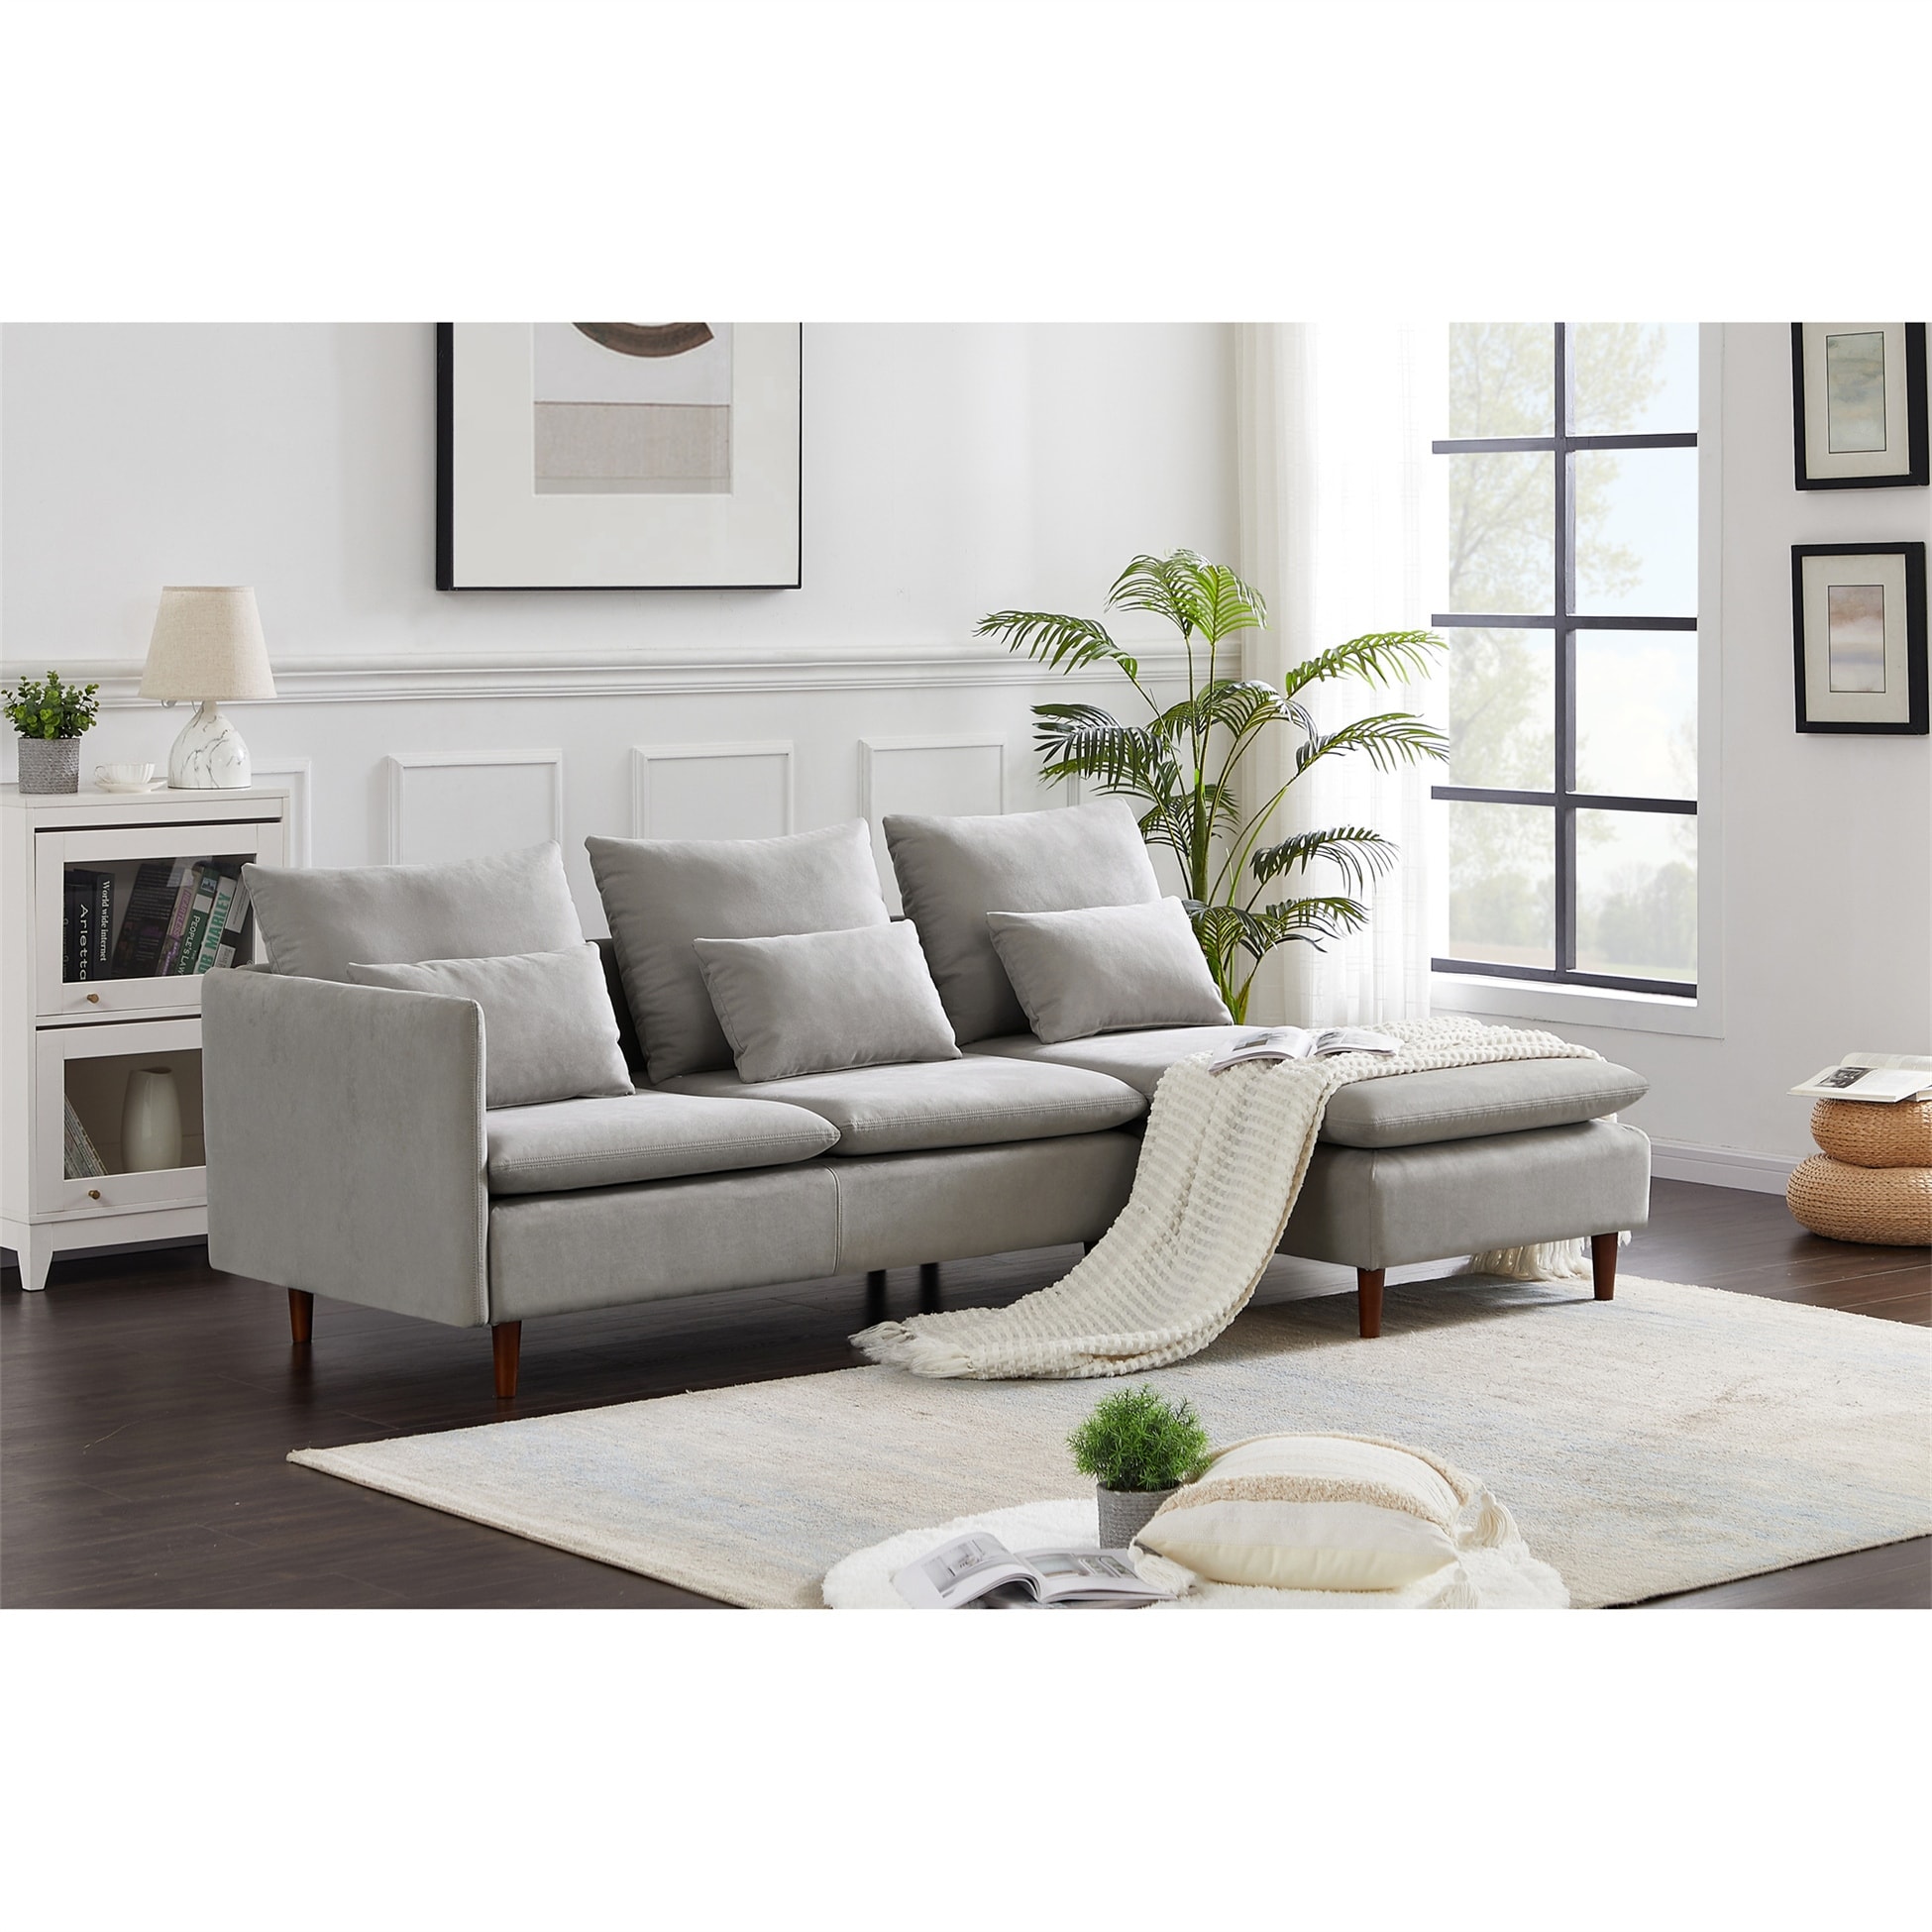 Gray Water Ripple Suede Sectional Sofa With Chaise Longue